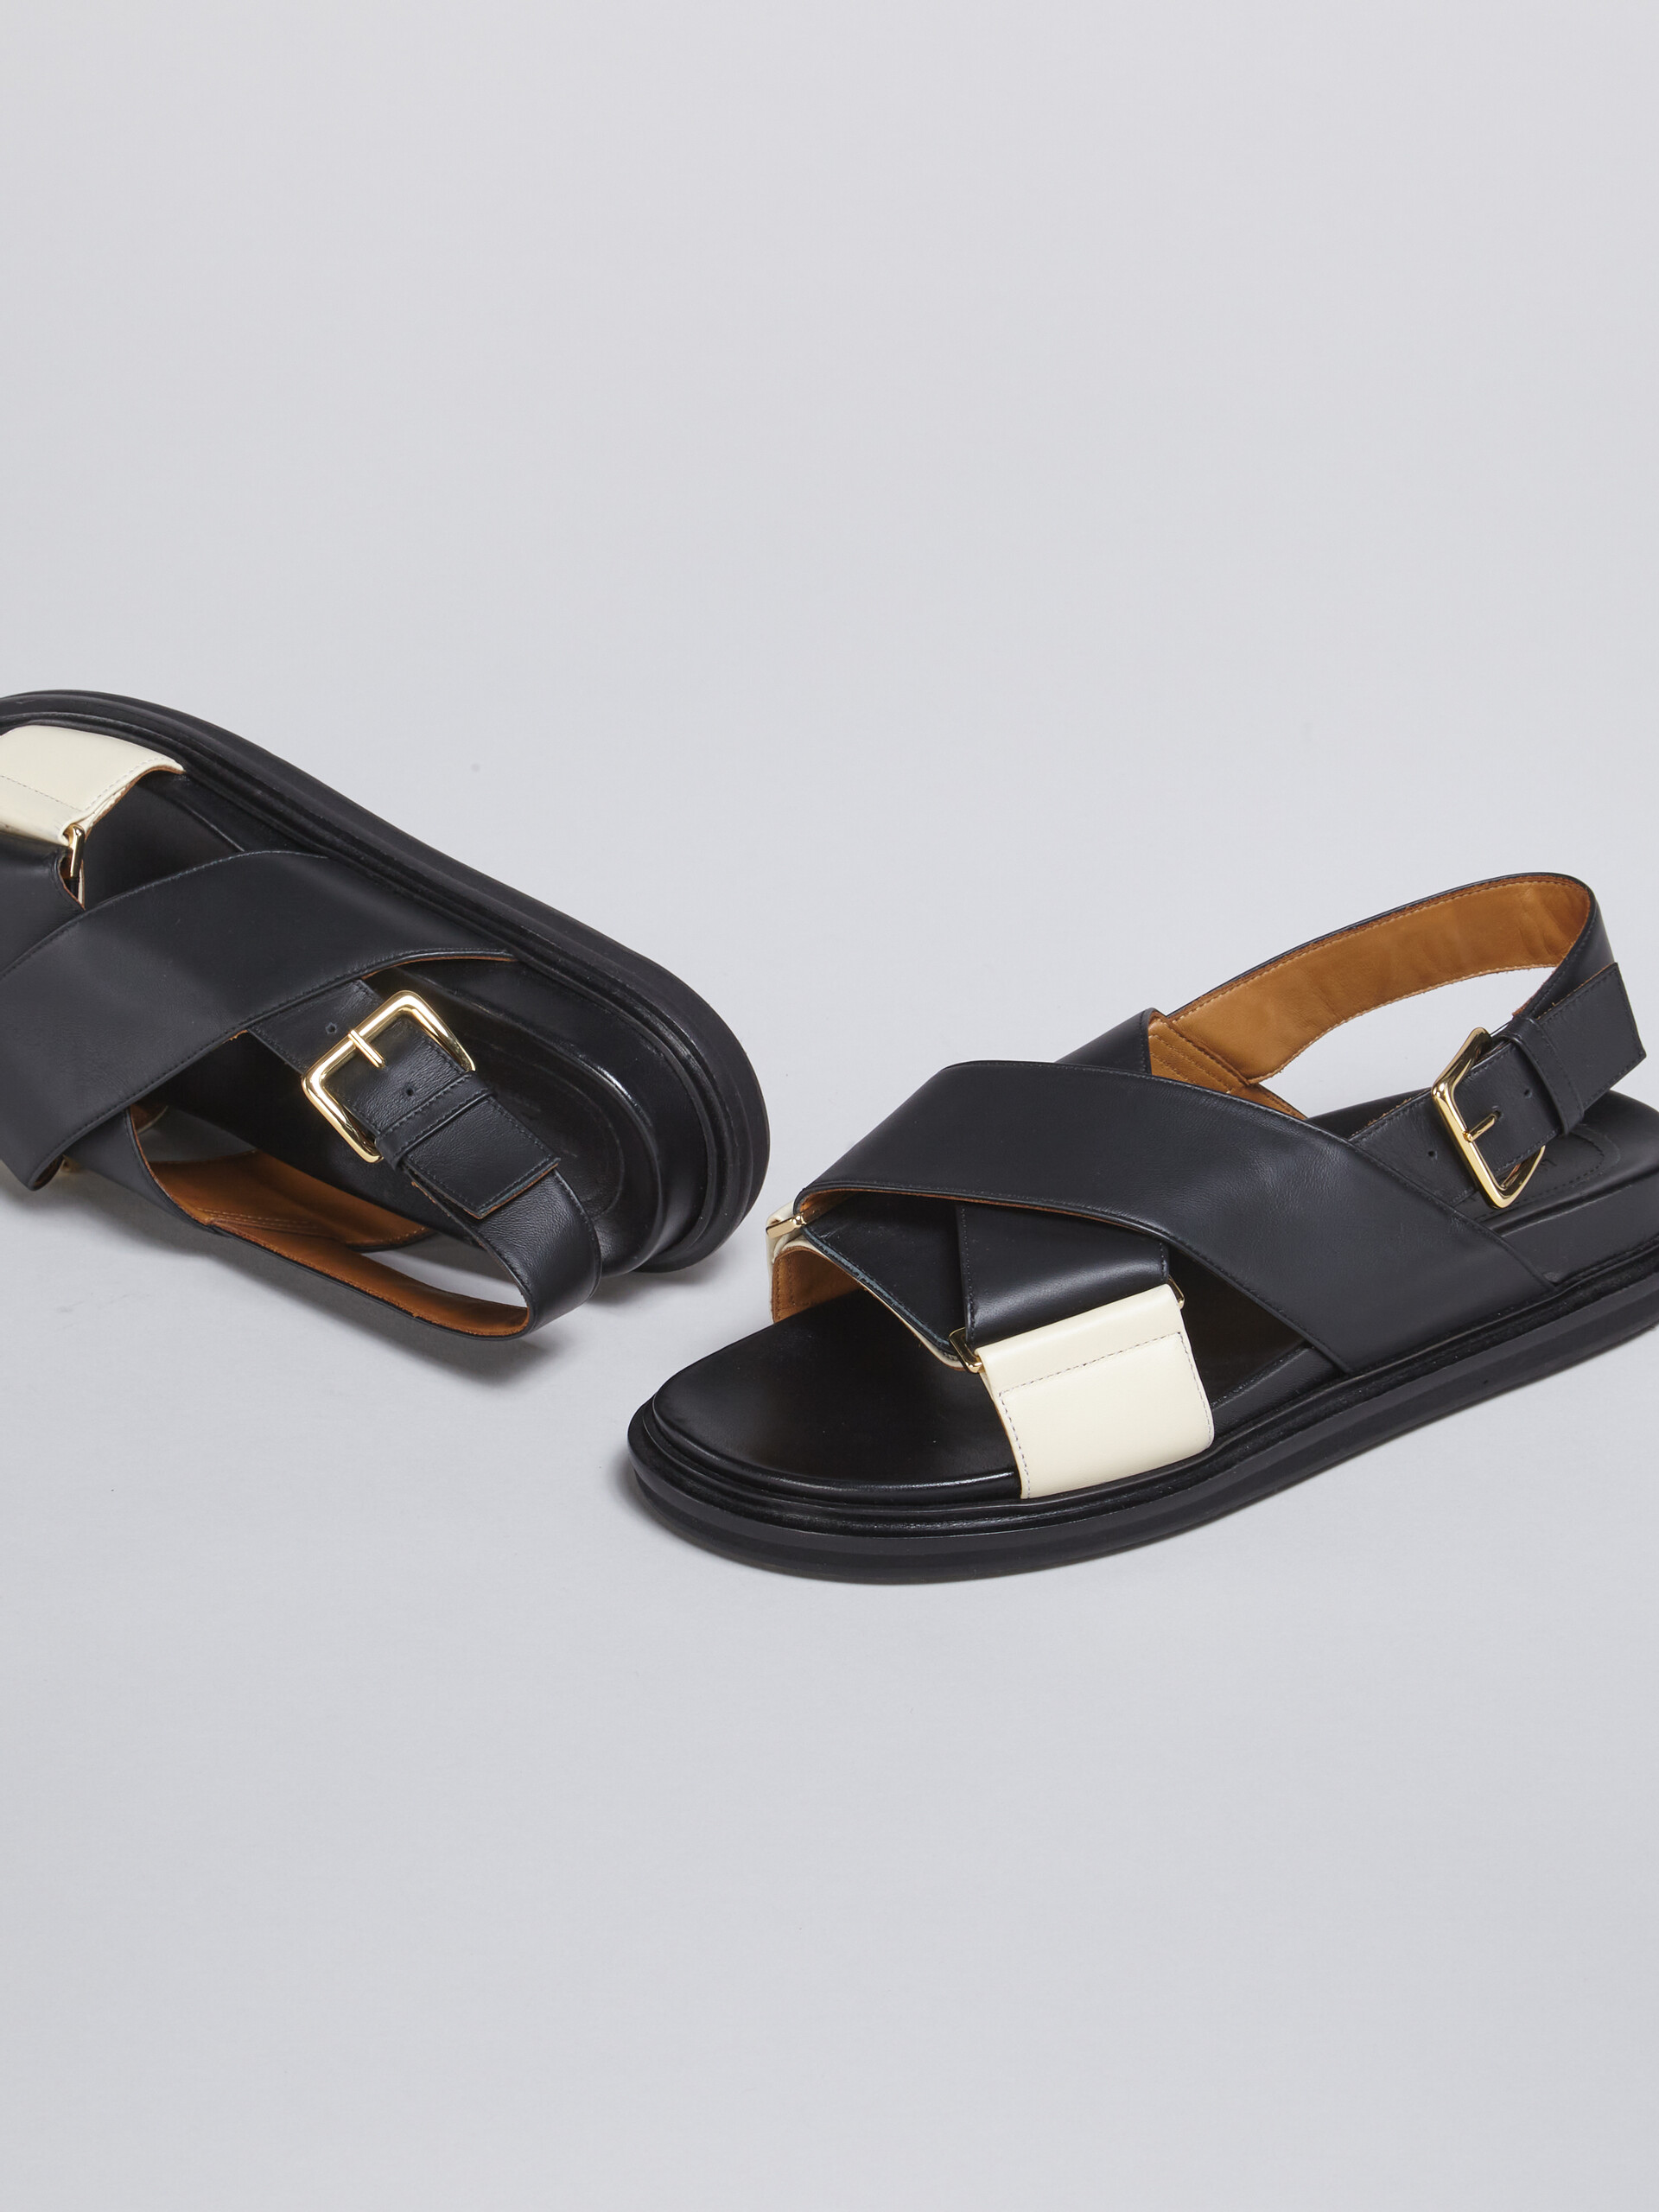 Black and white smooth calf leather fussbett - Sandals - Image 5